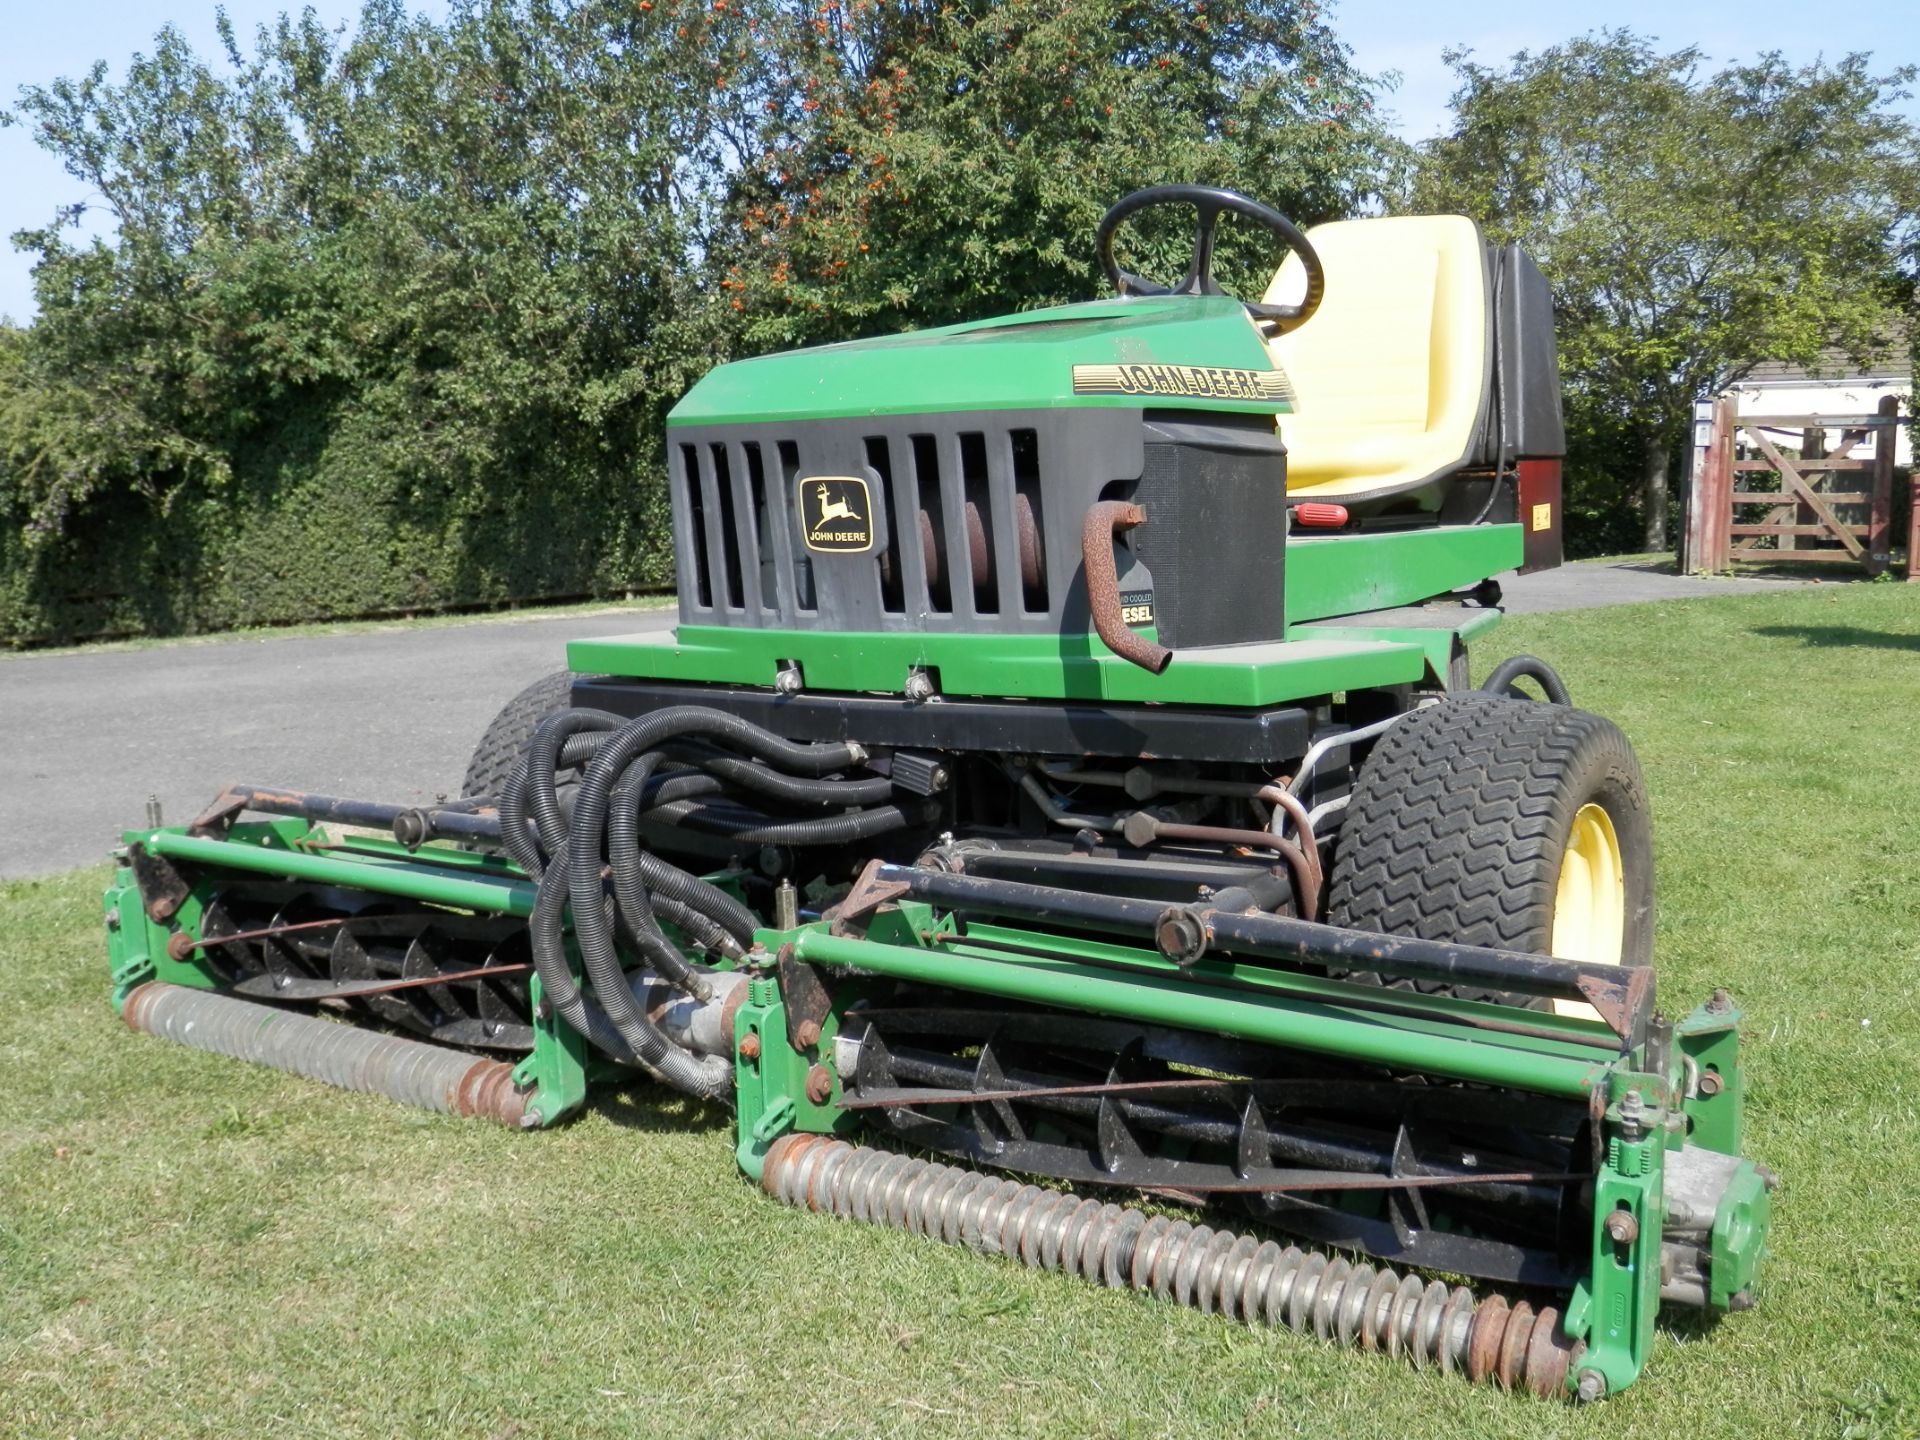 1996 JOHN DEERE 2653A RIDE ON GANG MOWER,CHECKED & WORKING. WIDE CUT, IDEAL FOR ESTATES/GOLF COURSES - Image 11 of 11